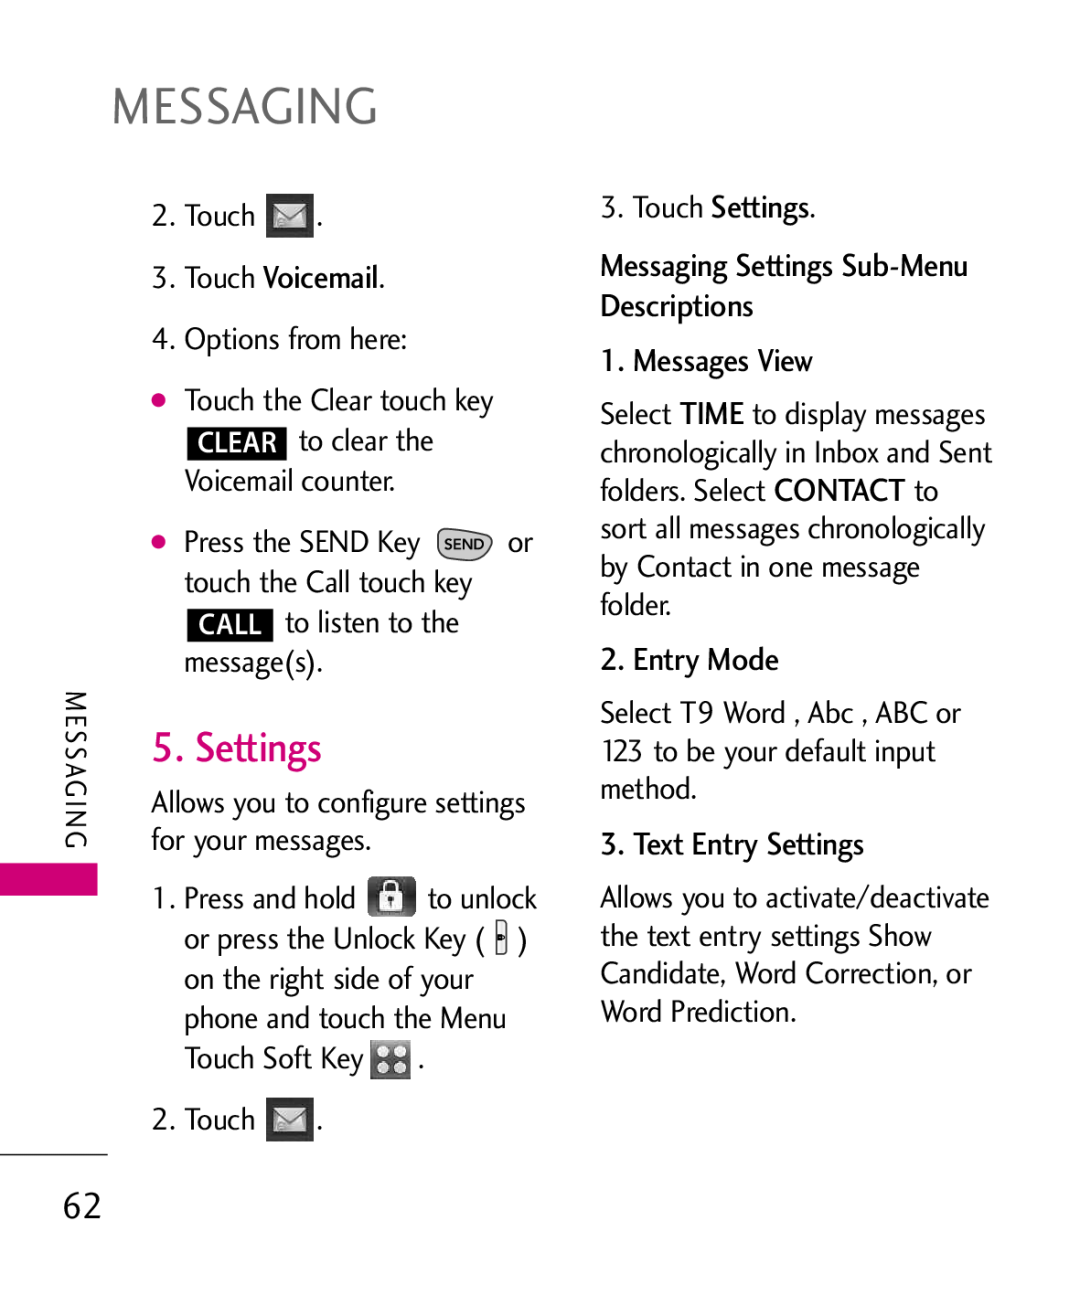 LG Electronics MMBB0379501 Touch Voicemail, Touch Settings Messaging Settings Sub-Menu Descriptions, Messages View 